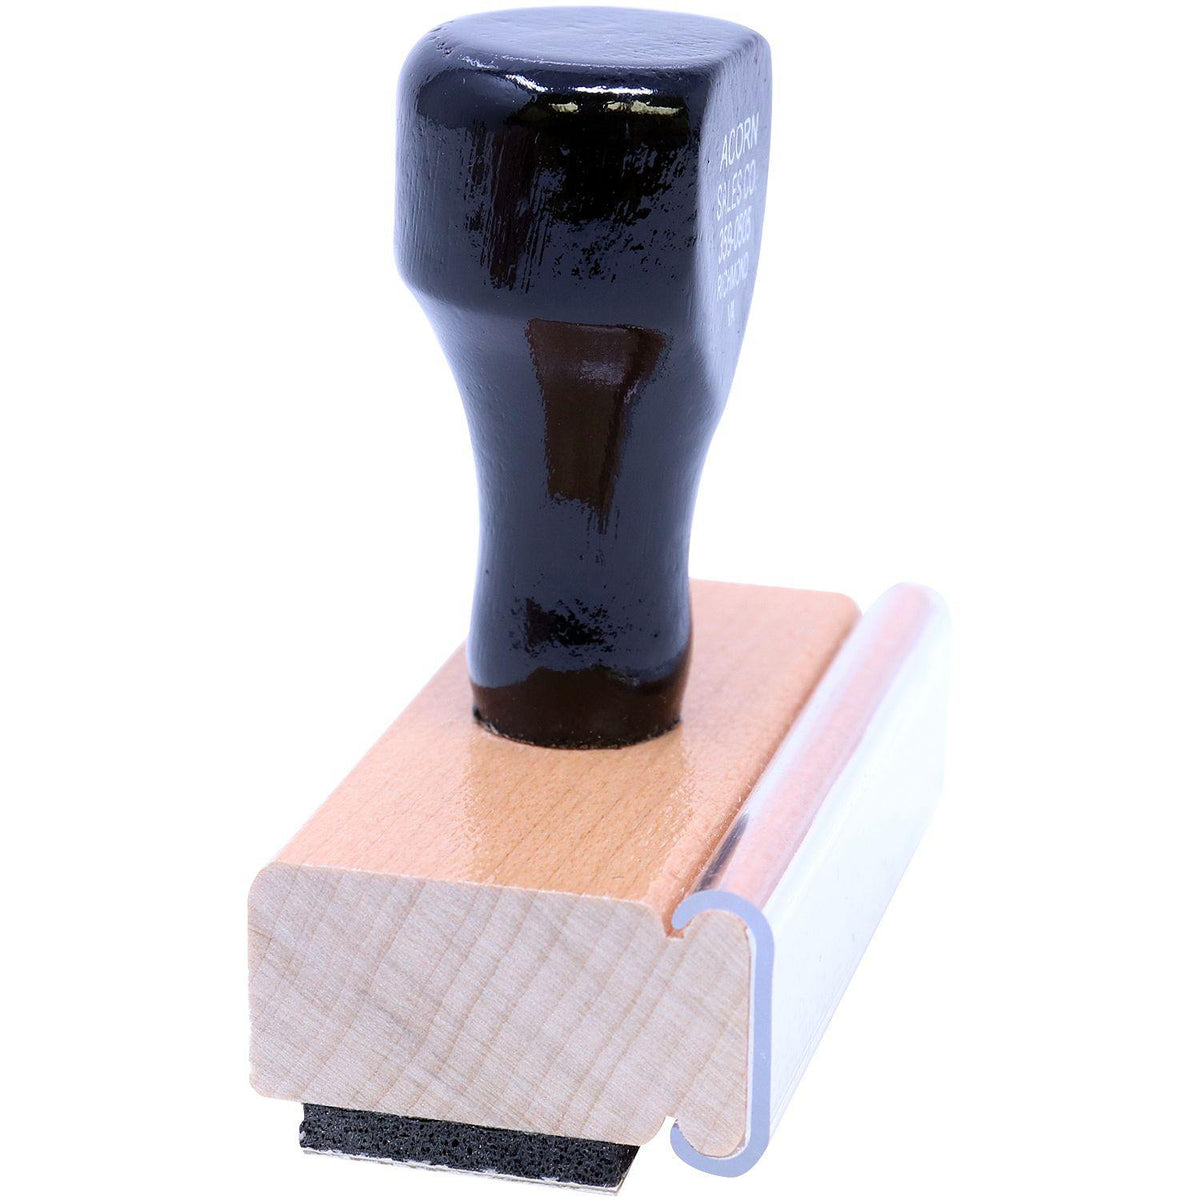 Restricted Delivery Rubber Stamp - Engineer Seal Stamps - Brand_Acorn, Impression Size_Small, Stamp Type_Regular Stamp, Type of Use_Postal &amp; Mailing, Type of Use_Shipping &amp; Receiving